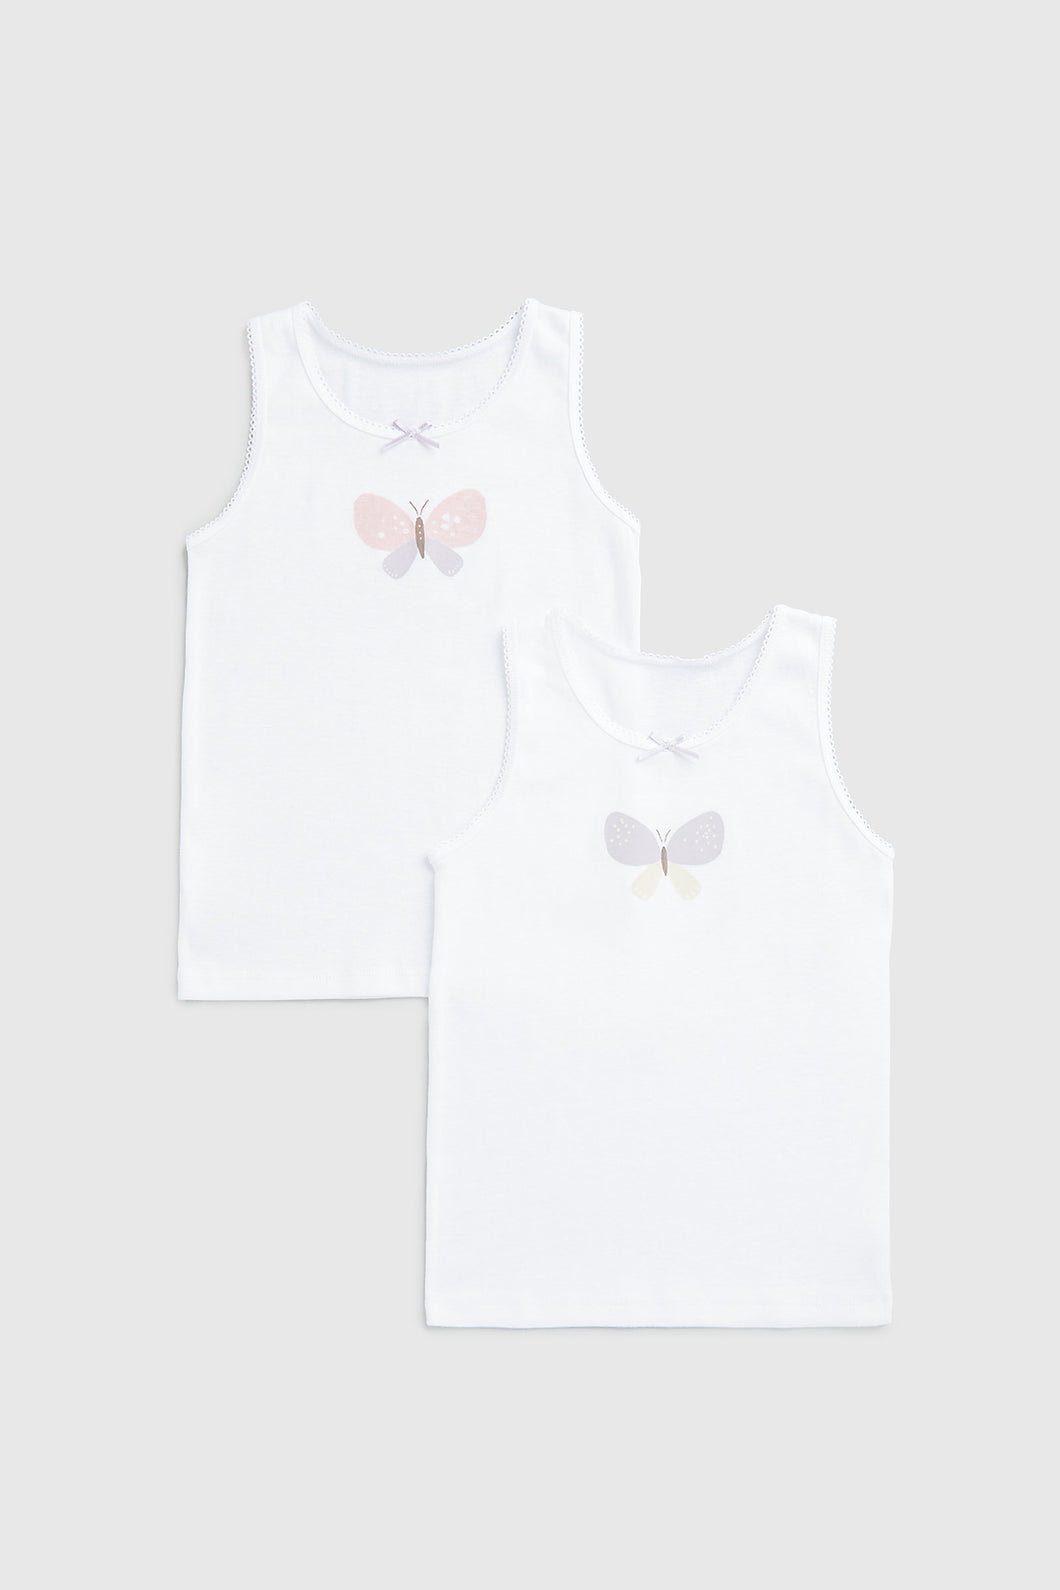 Mothercare Butterfly Sleeveless Vests - 2 Pack